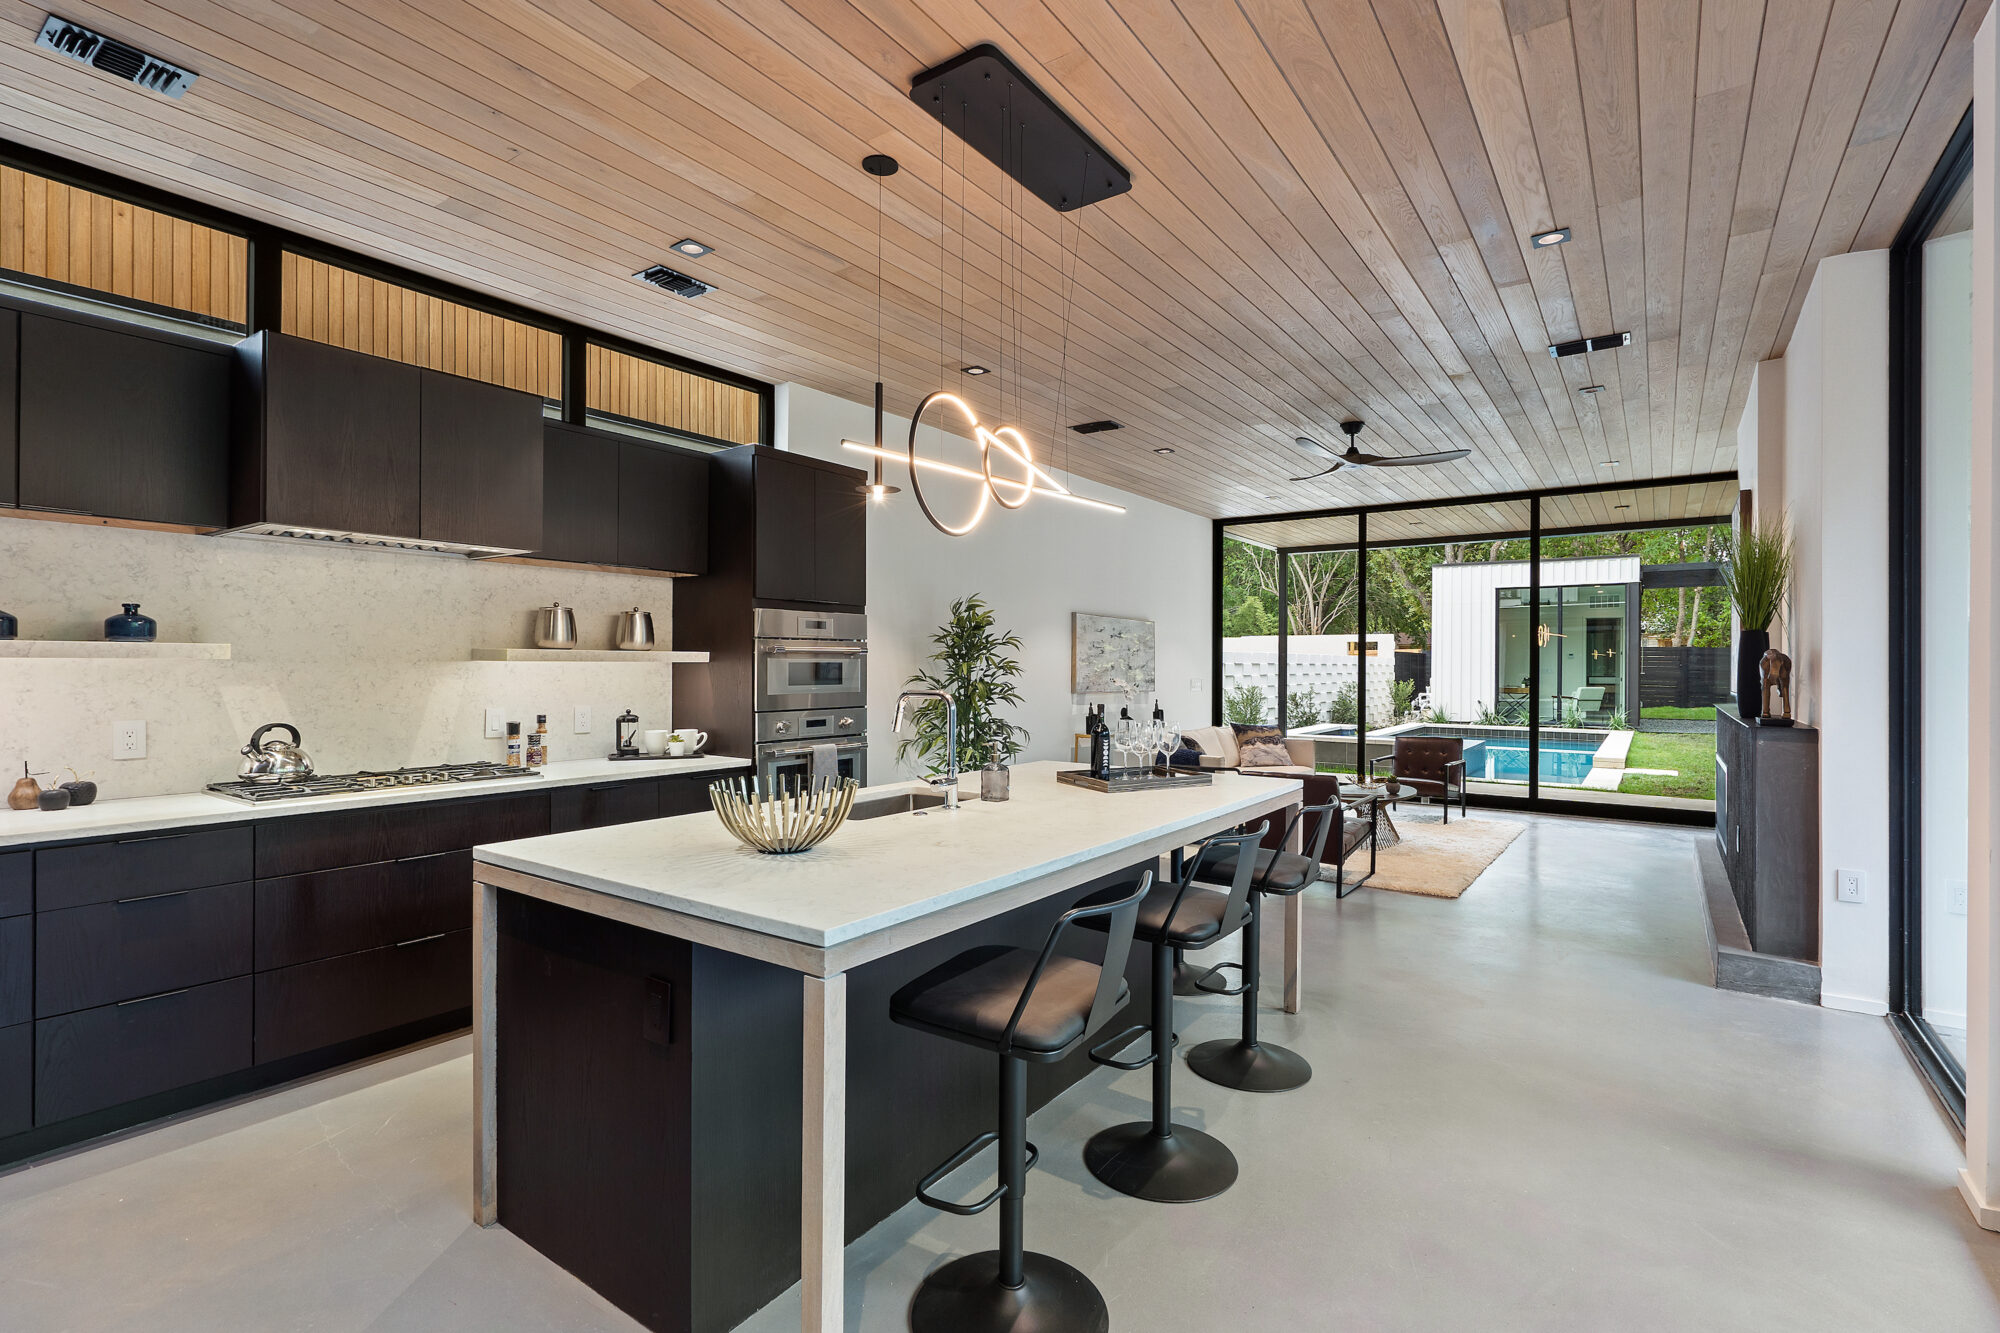 A contemporary kitchen featuring a wooden ceiling and sleek black appliances.